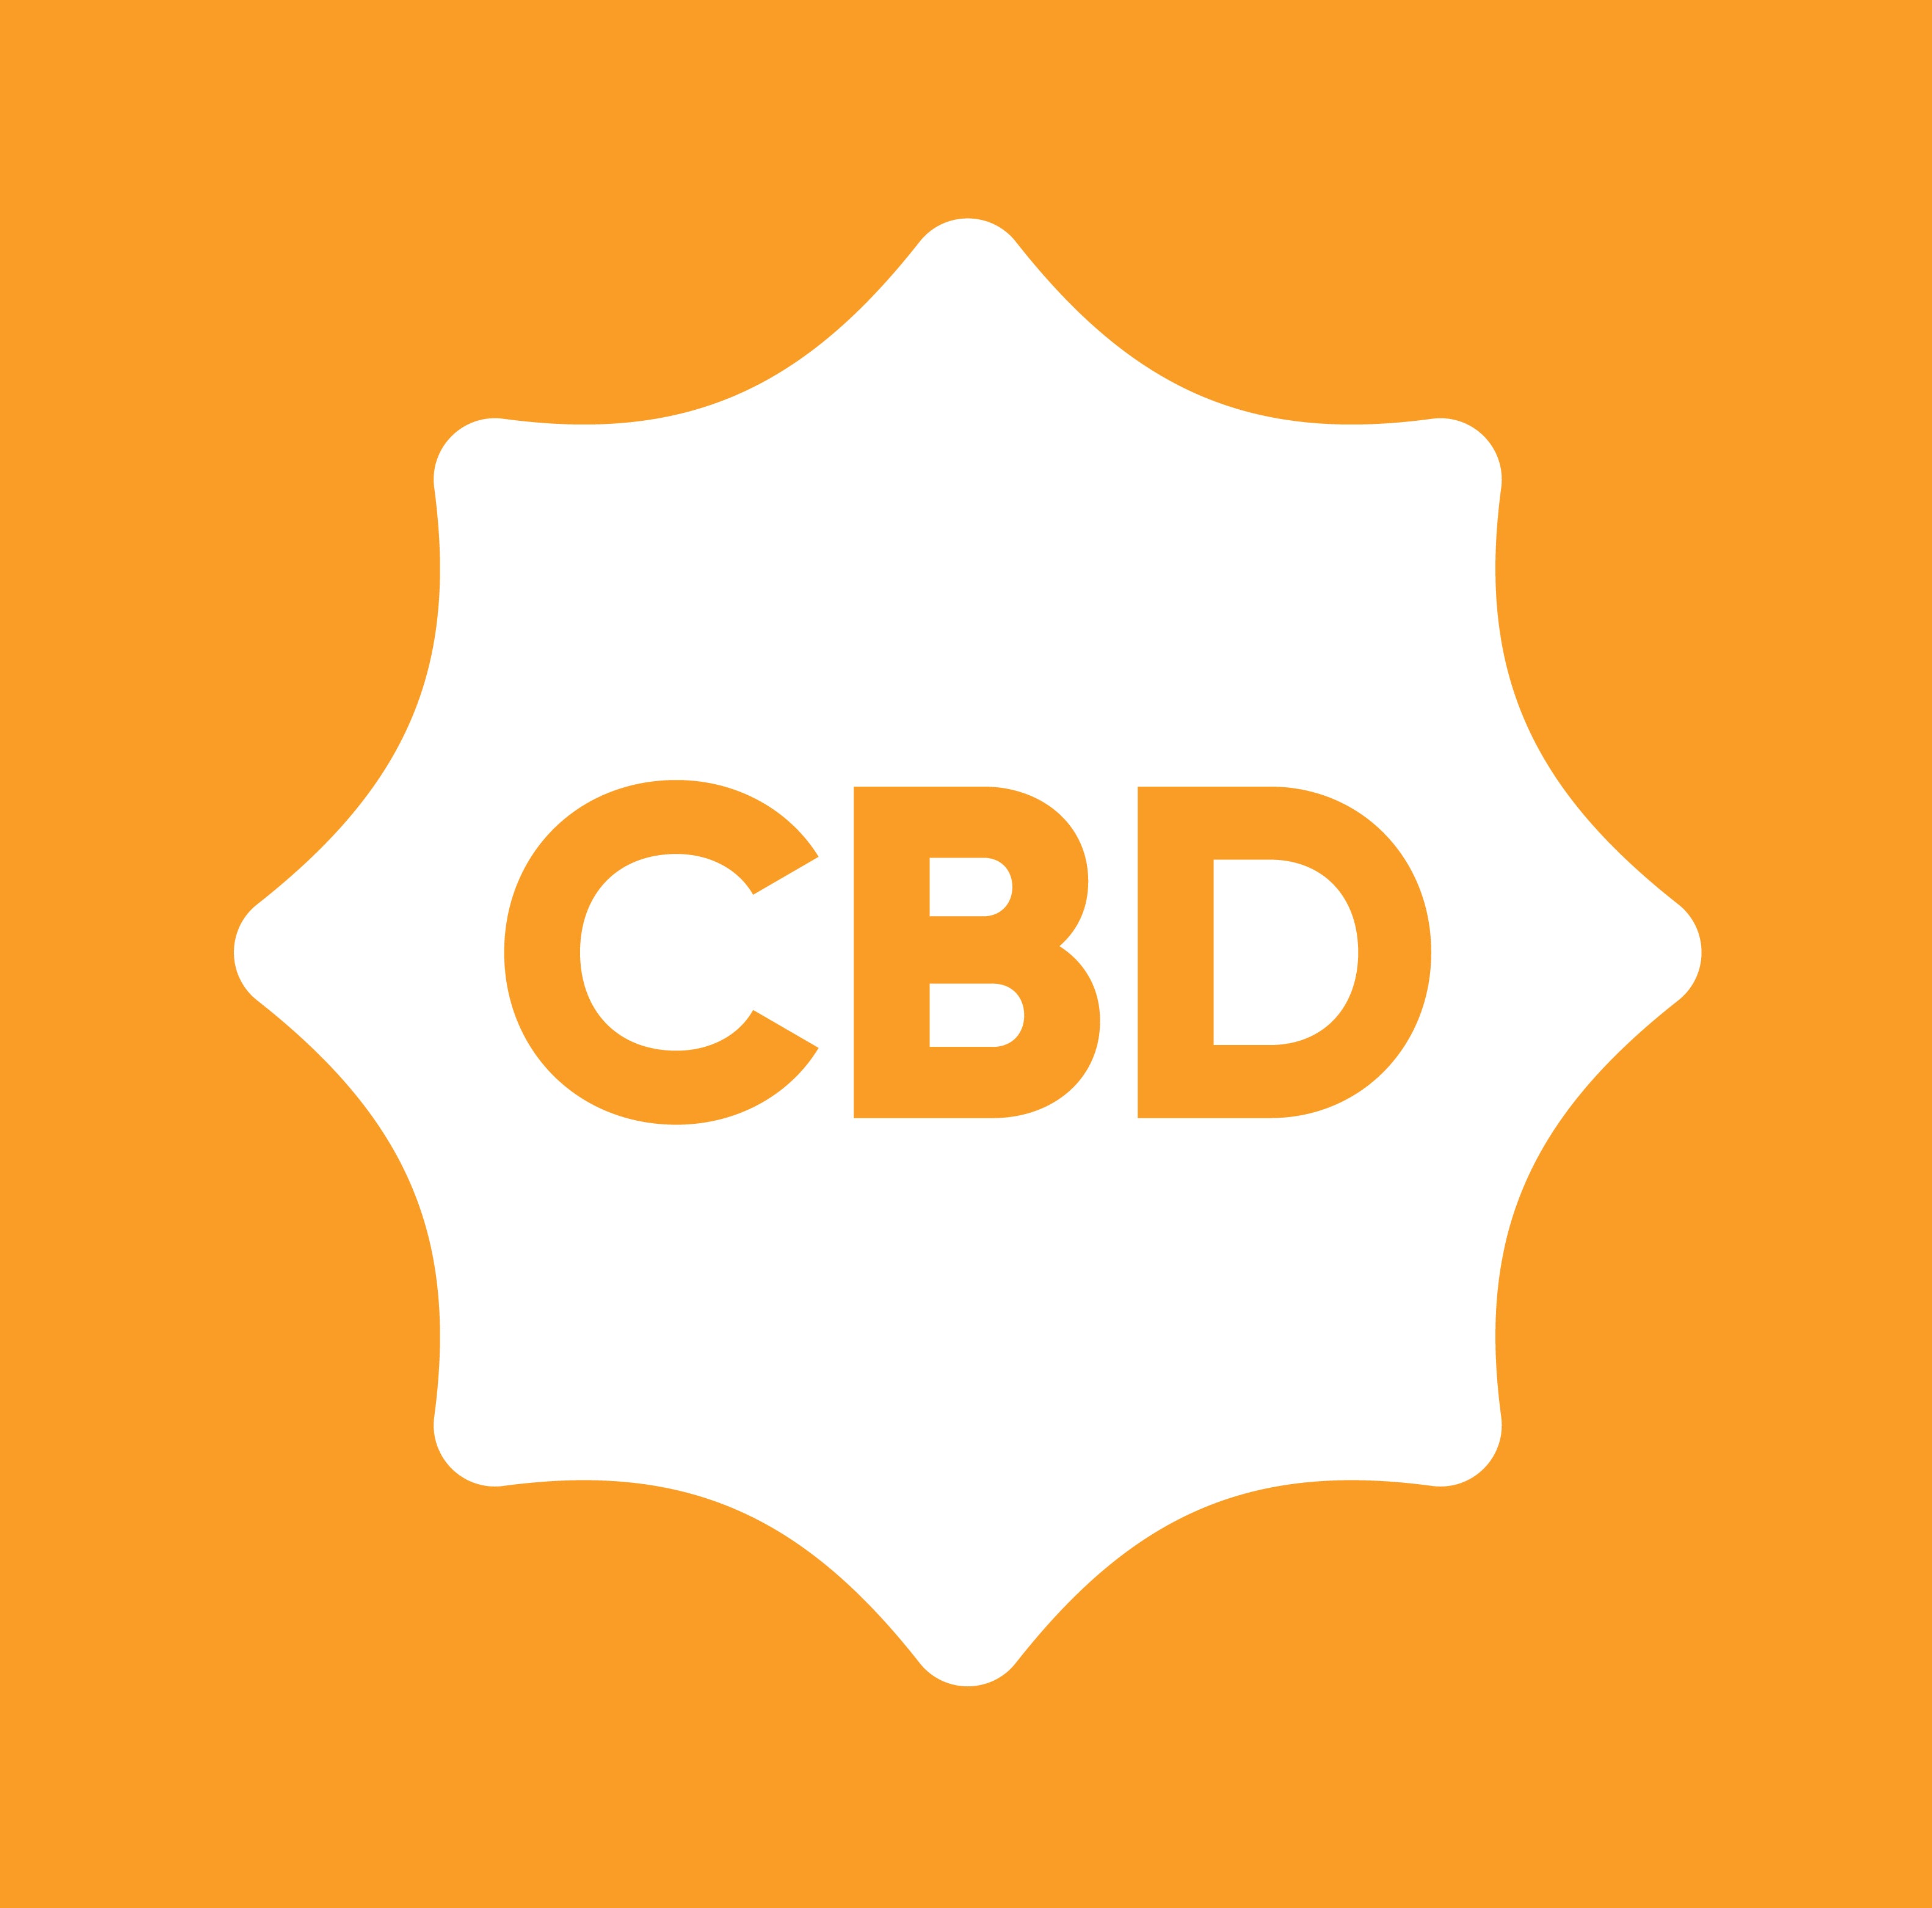 WHAT IS CBD AND THE ENDOCANNABINOID SYSTEM?